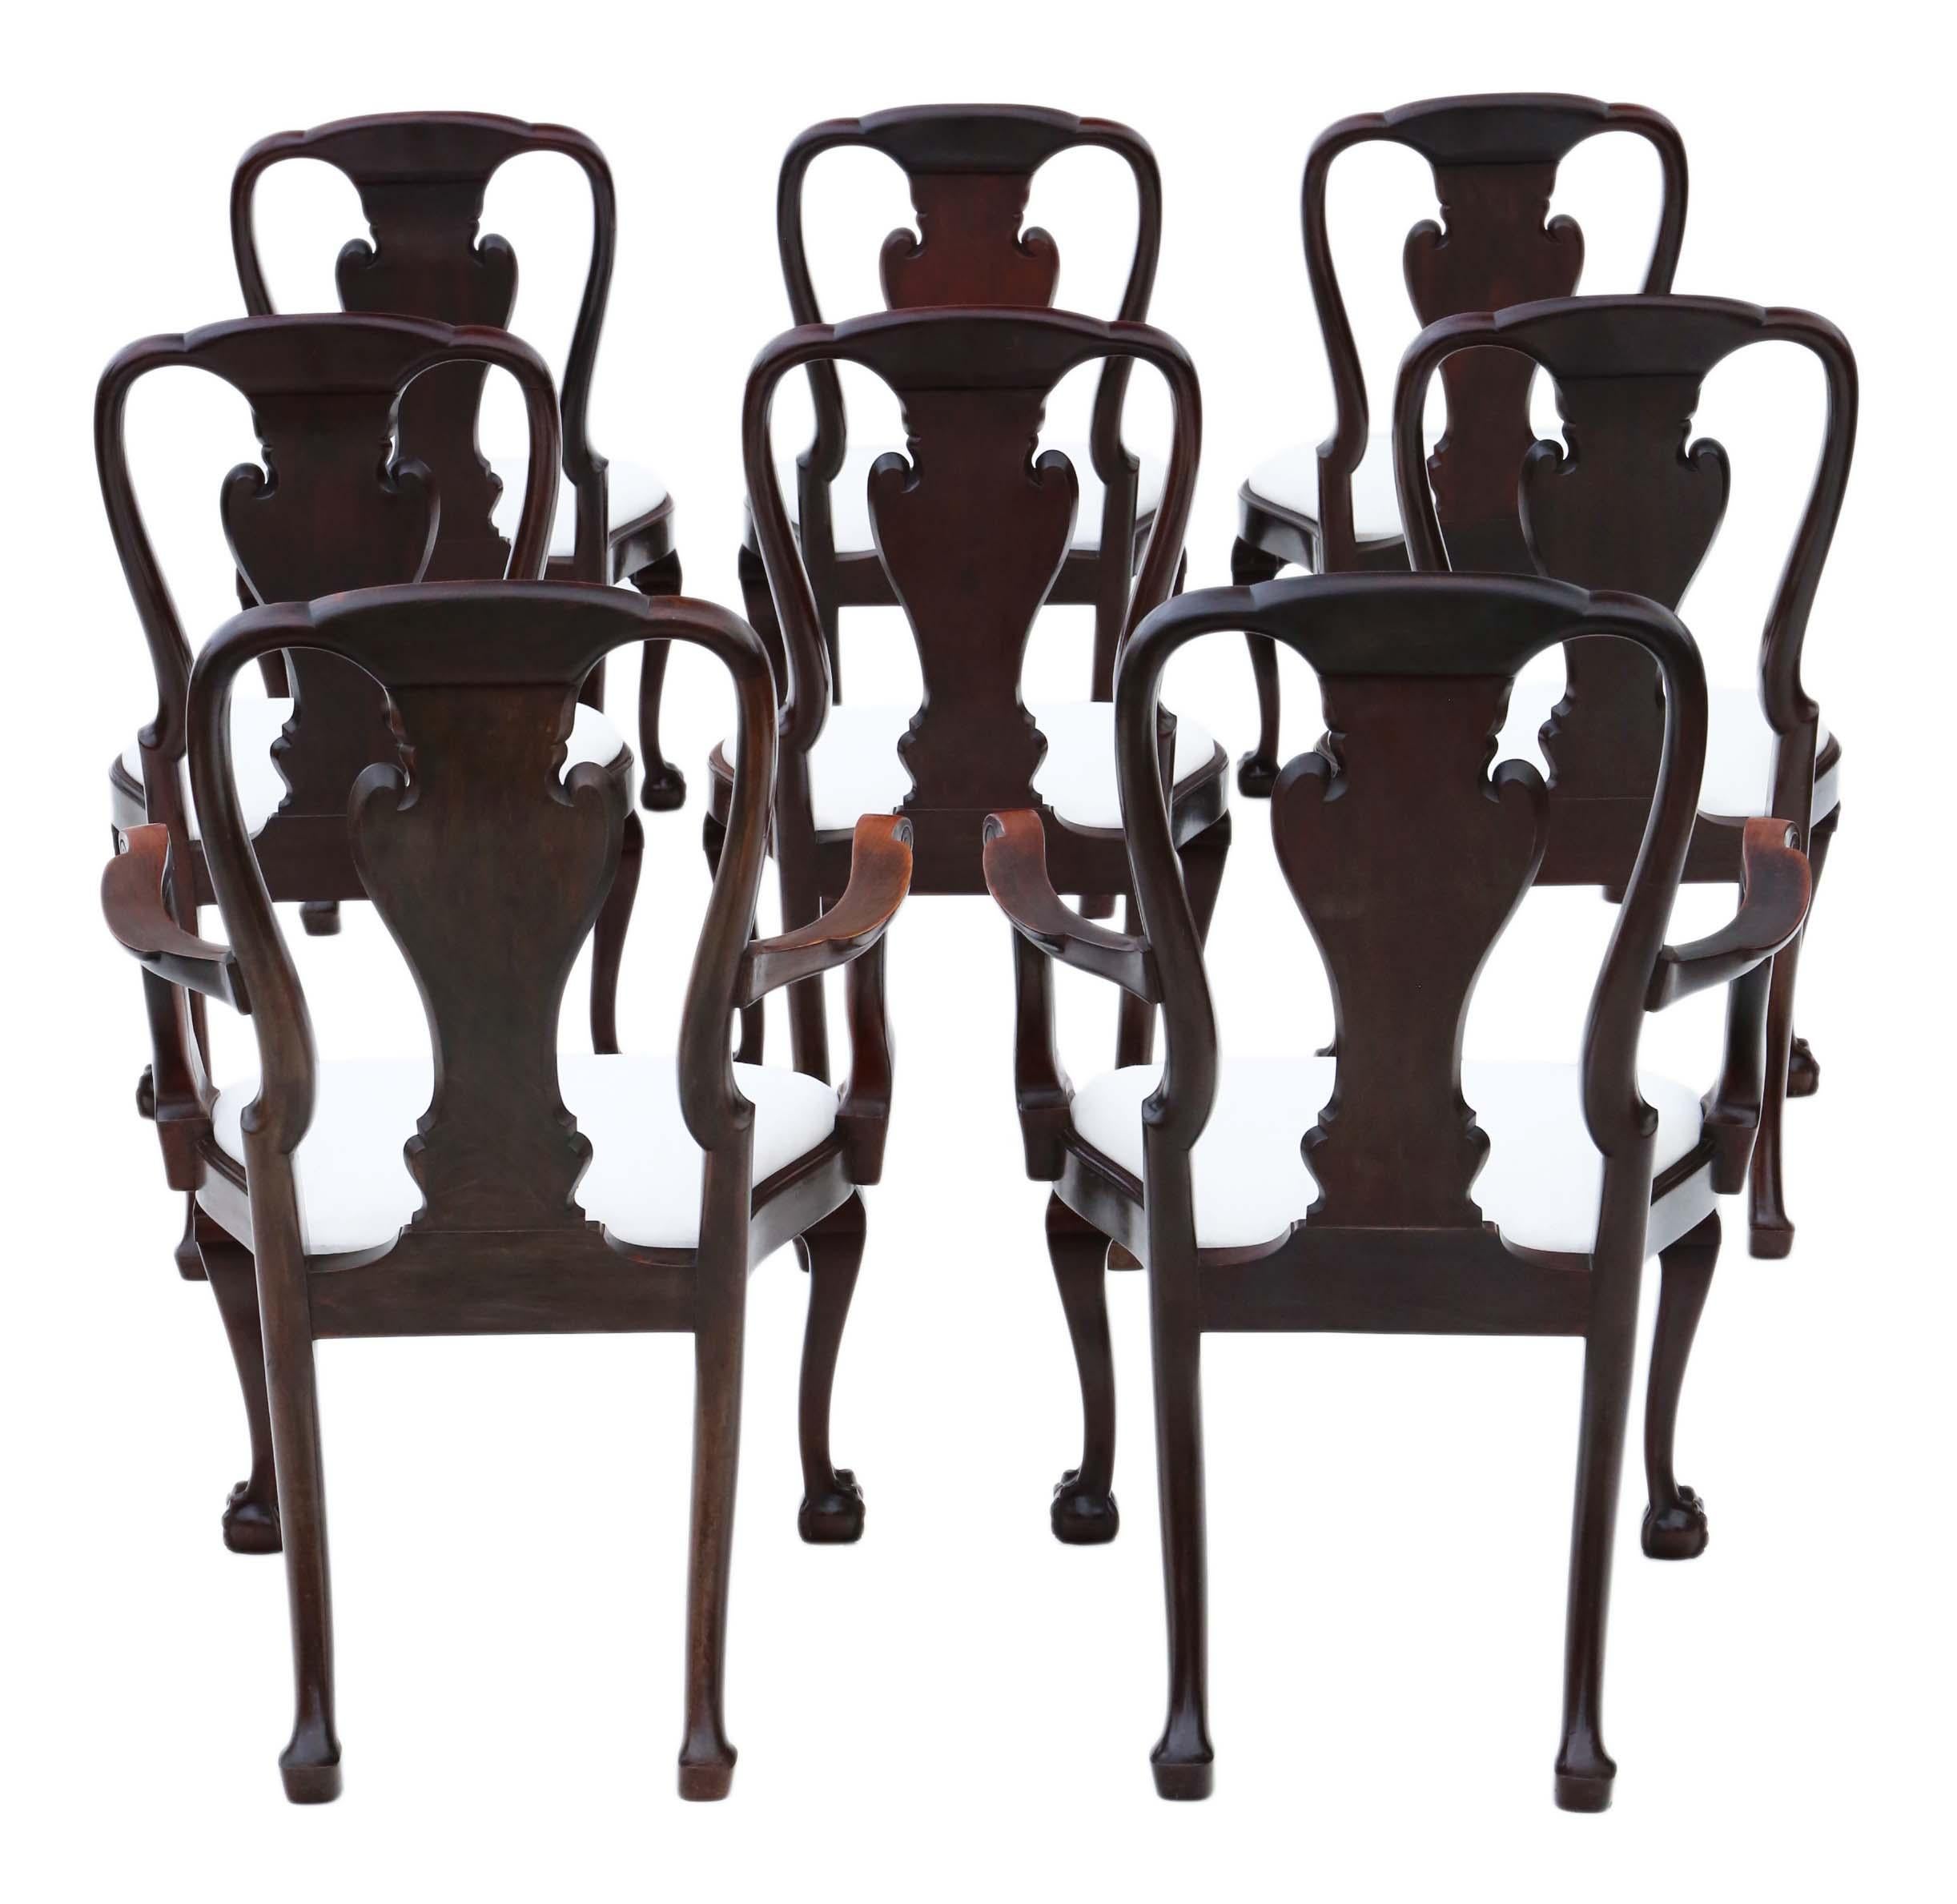 Antique fine quality set of 8 (6+2) carved mahogany dining chairs Queen Anne revival, C1910. Beautifully carved backs / ball and claw feet.

Exceptional quality, solid, heavy and strong with no loose joints. Lovely simple plain but opulent design,